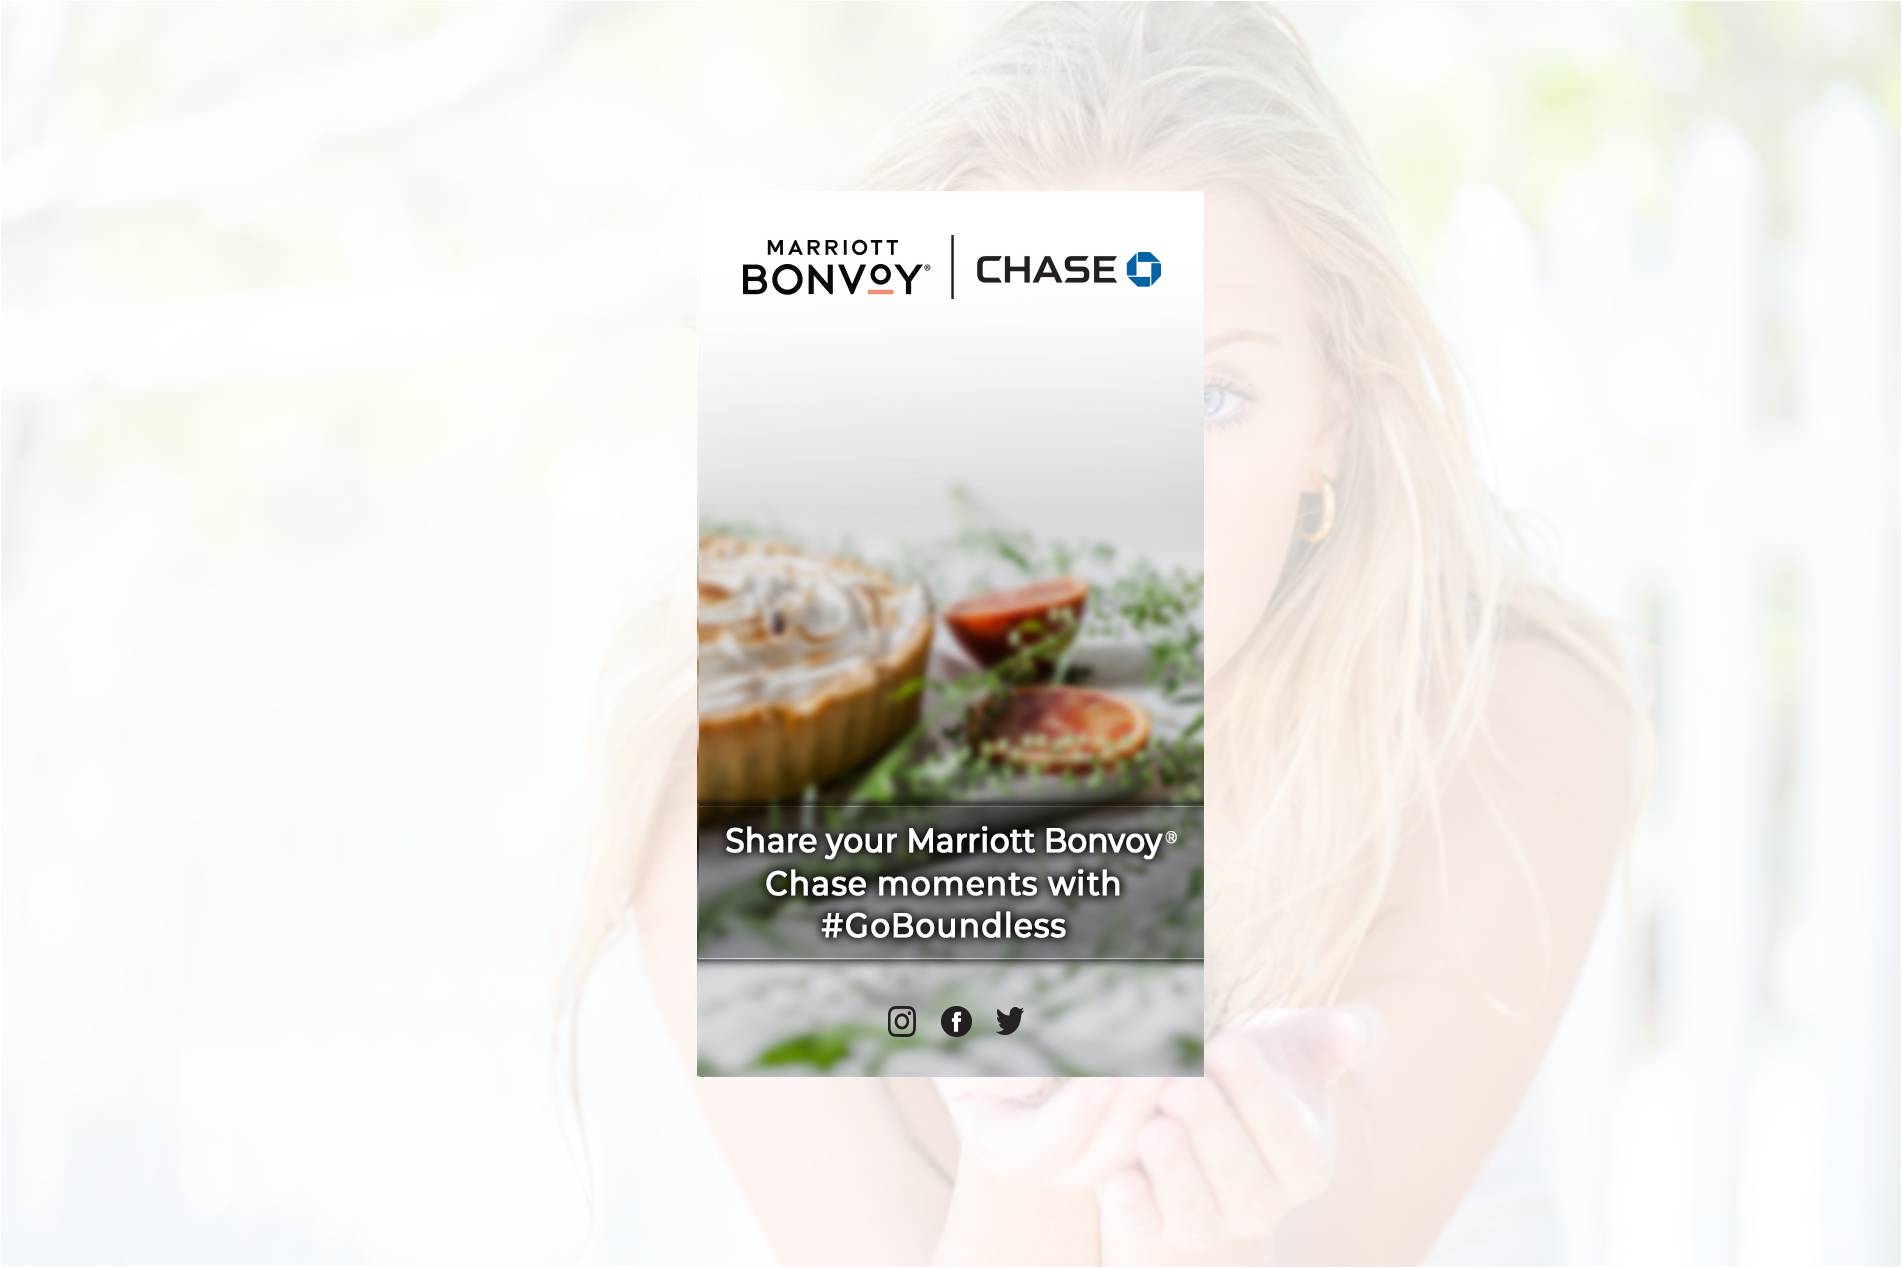 Share your Marriott Bonvoy® Chase moments with #GoBoundless